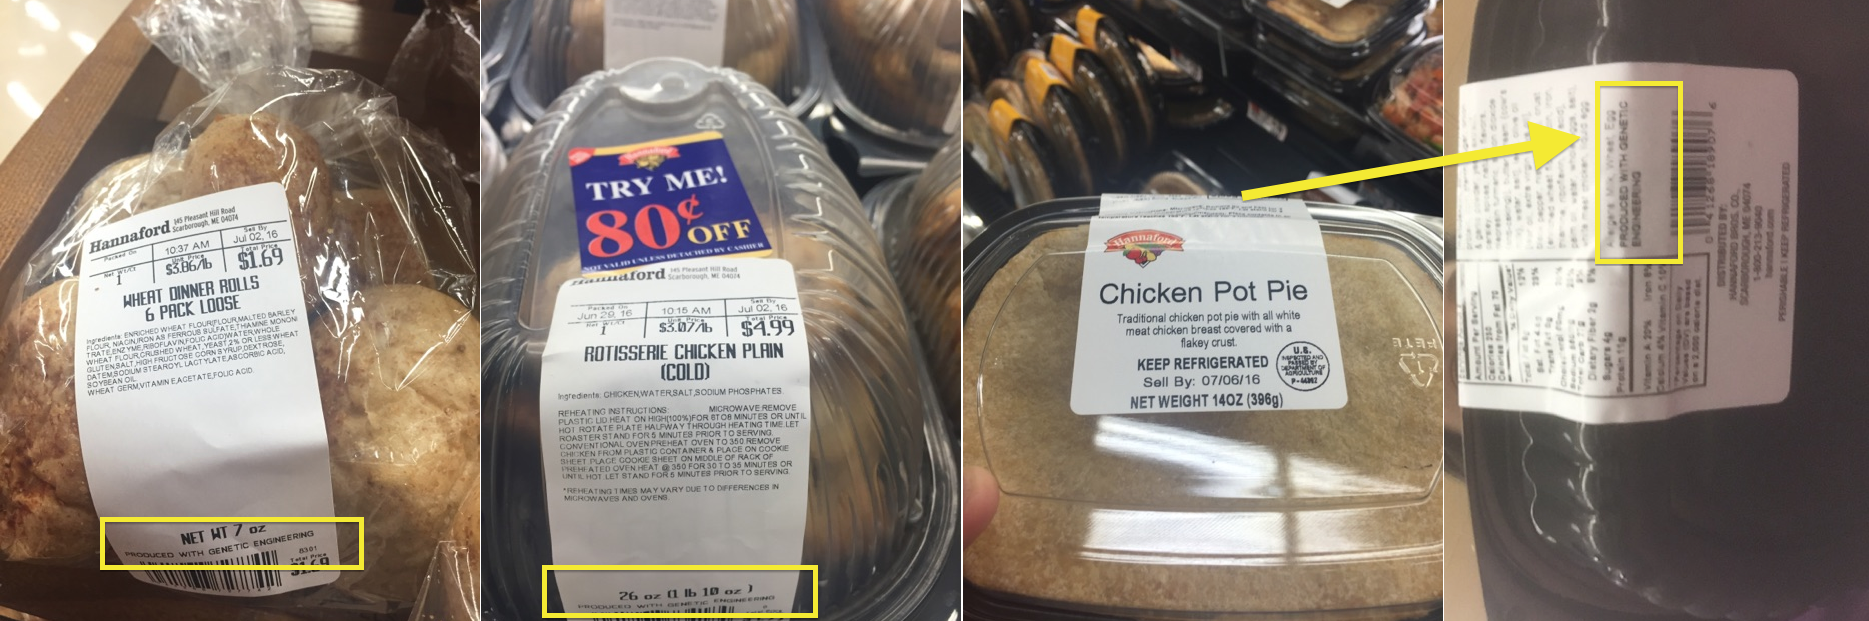 Grocery Association To Vermont Stores: Keep Labeling GMO Foods, But Only If You Want To